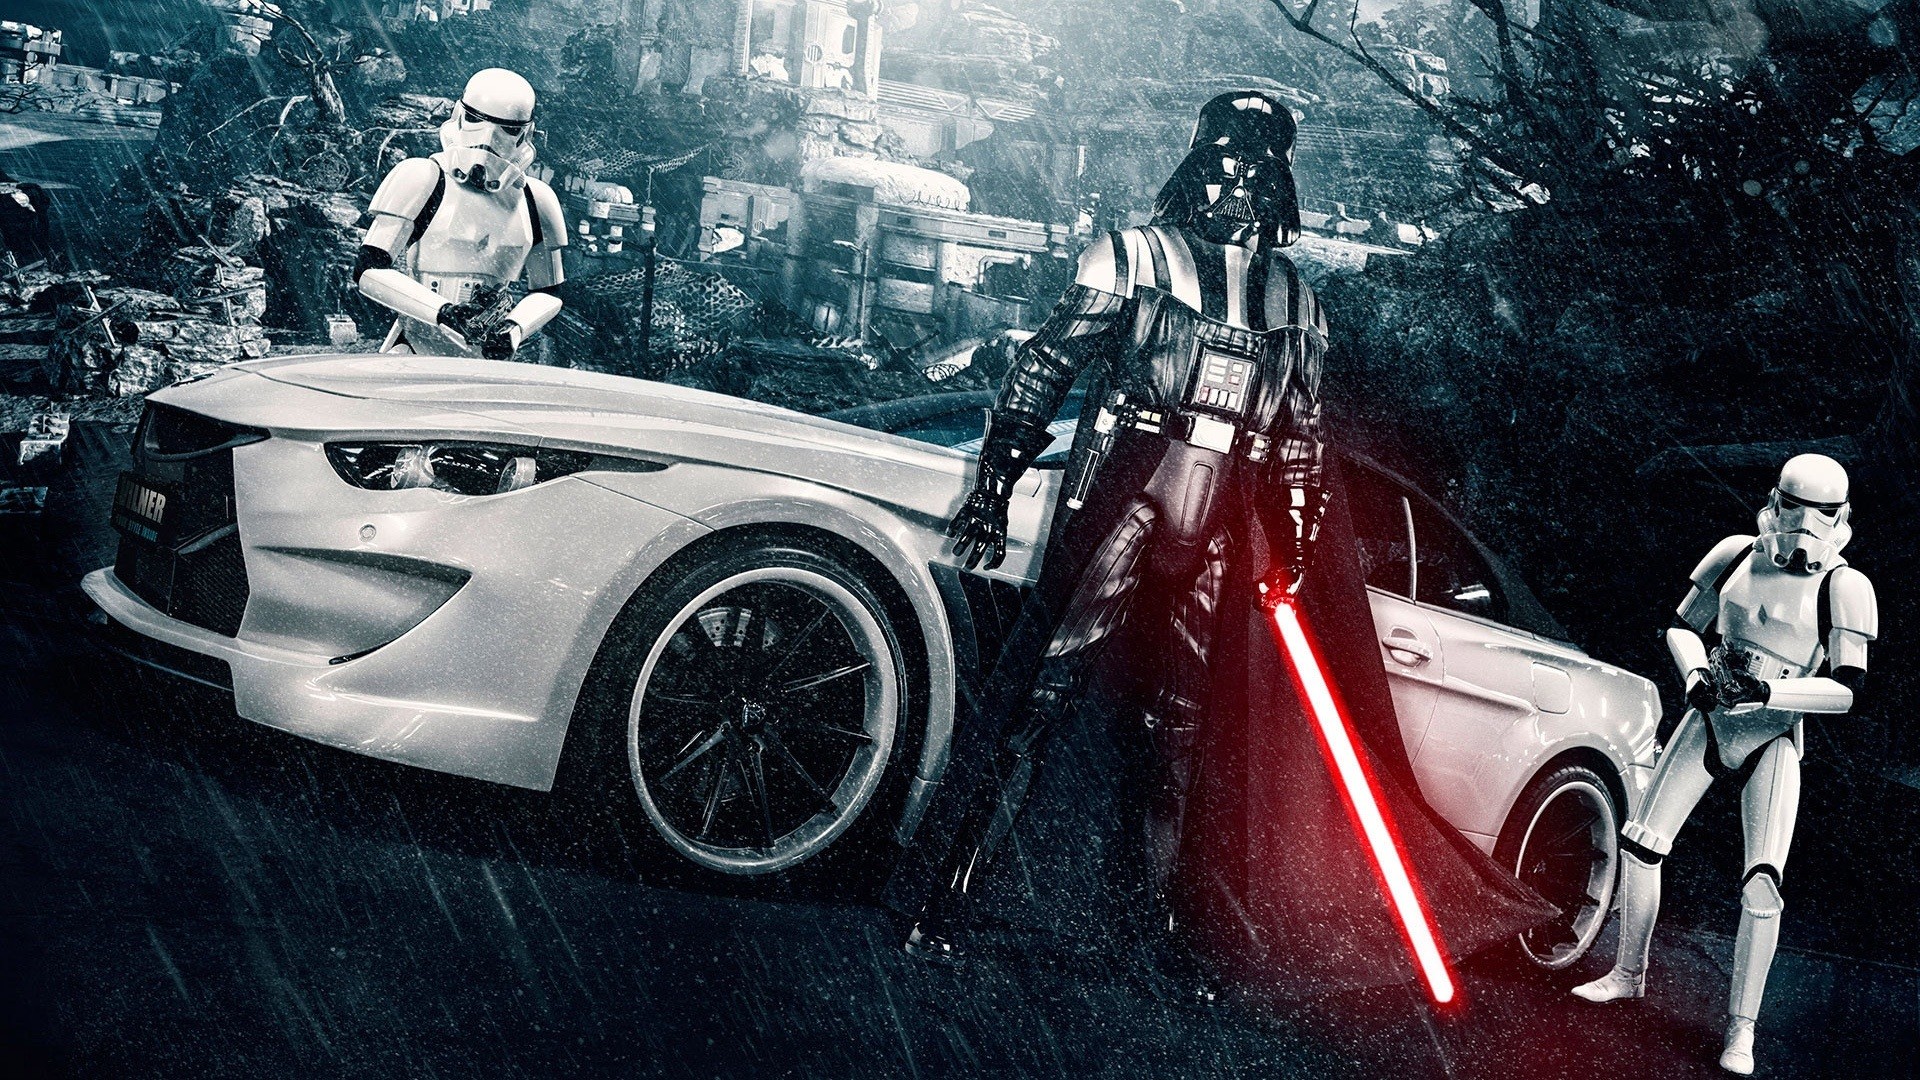 People 1920x1080 Star Wars Darth Vader car stormtrooper vehicle Sith Imperial Stormtrooper lightsaber science fiction movie characters